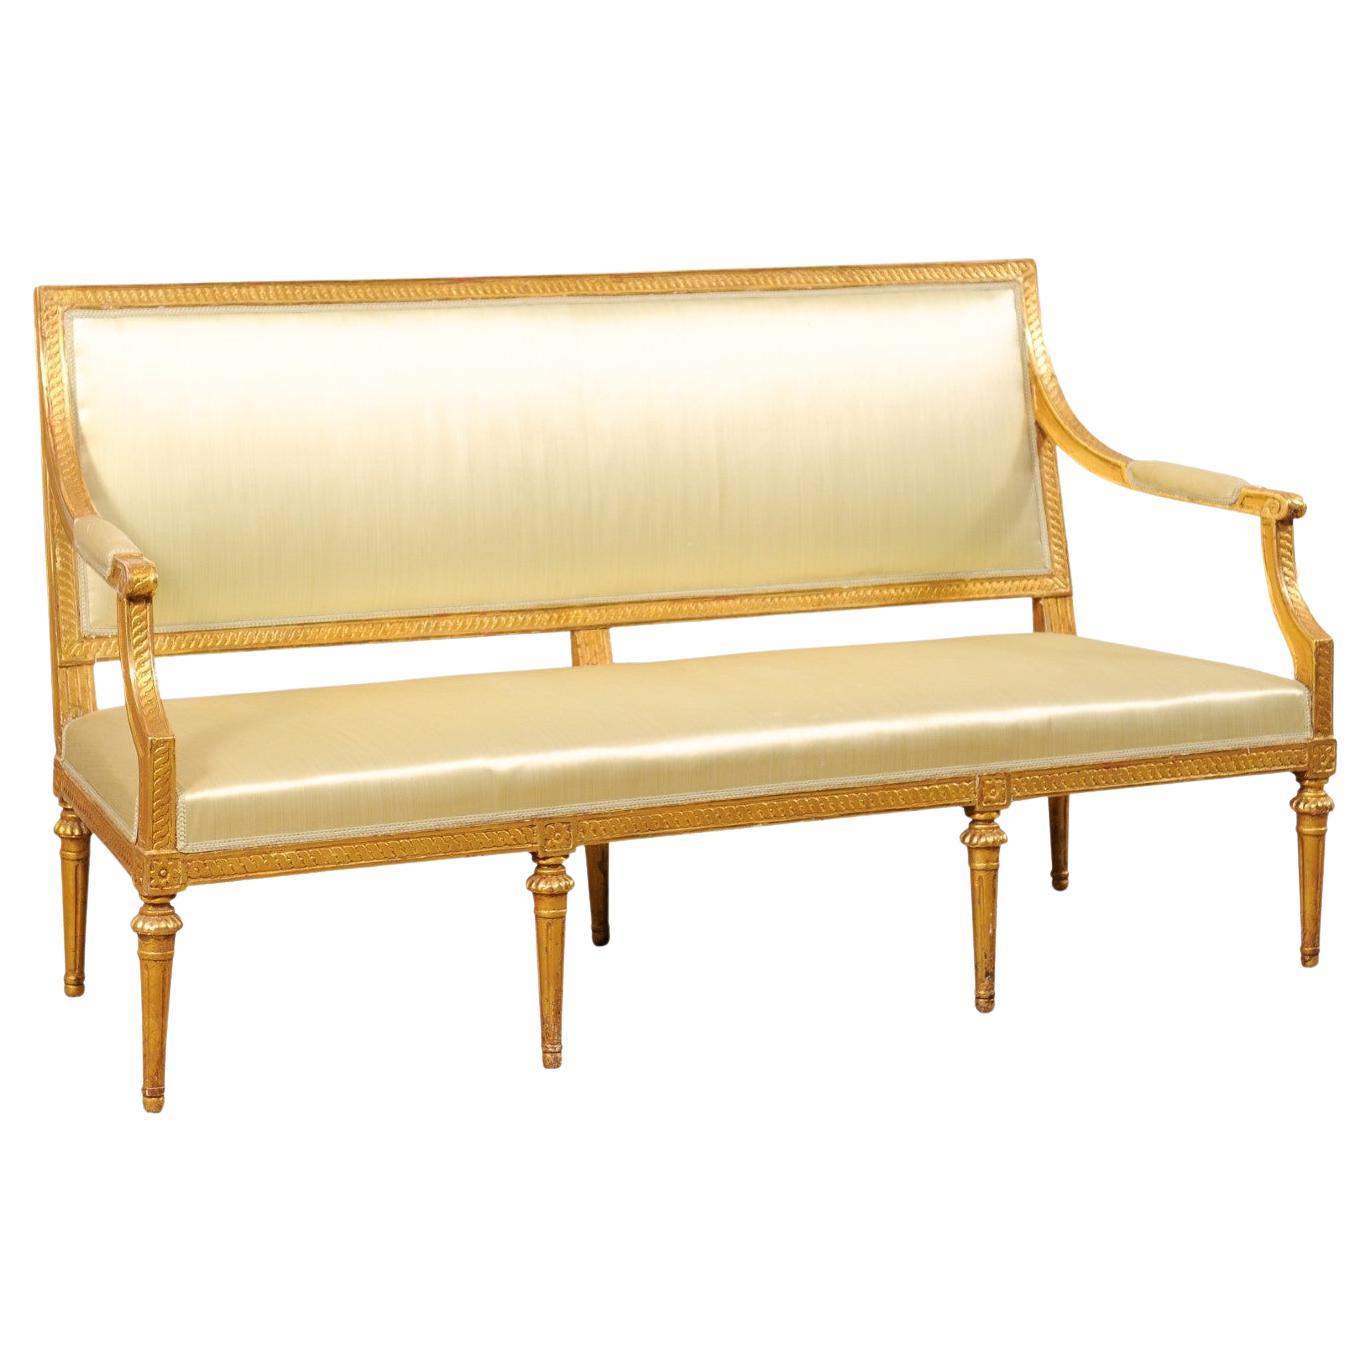 Swedish Neoclassical Style Carved Gilt-Wood & Upholstered Sofa Bench, 19th C.